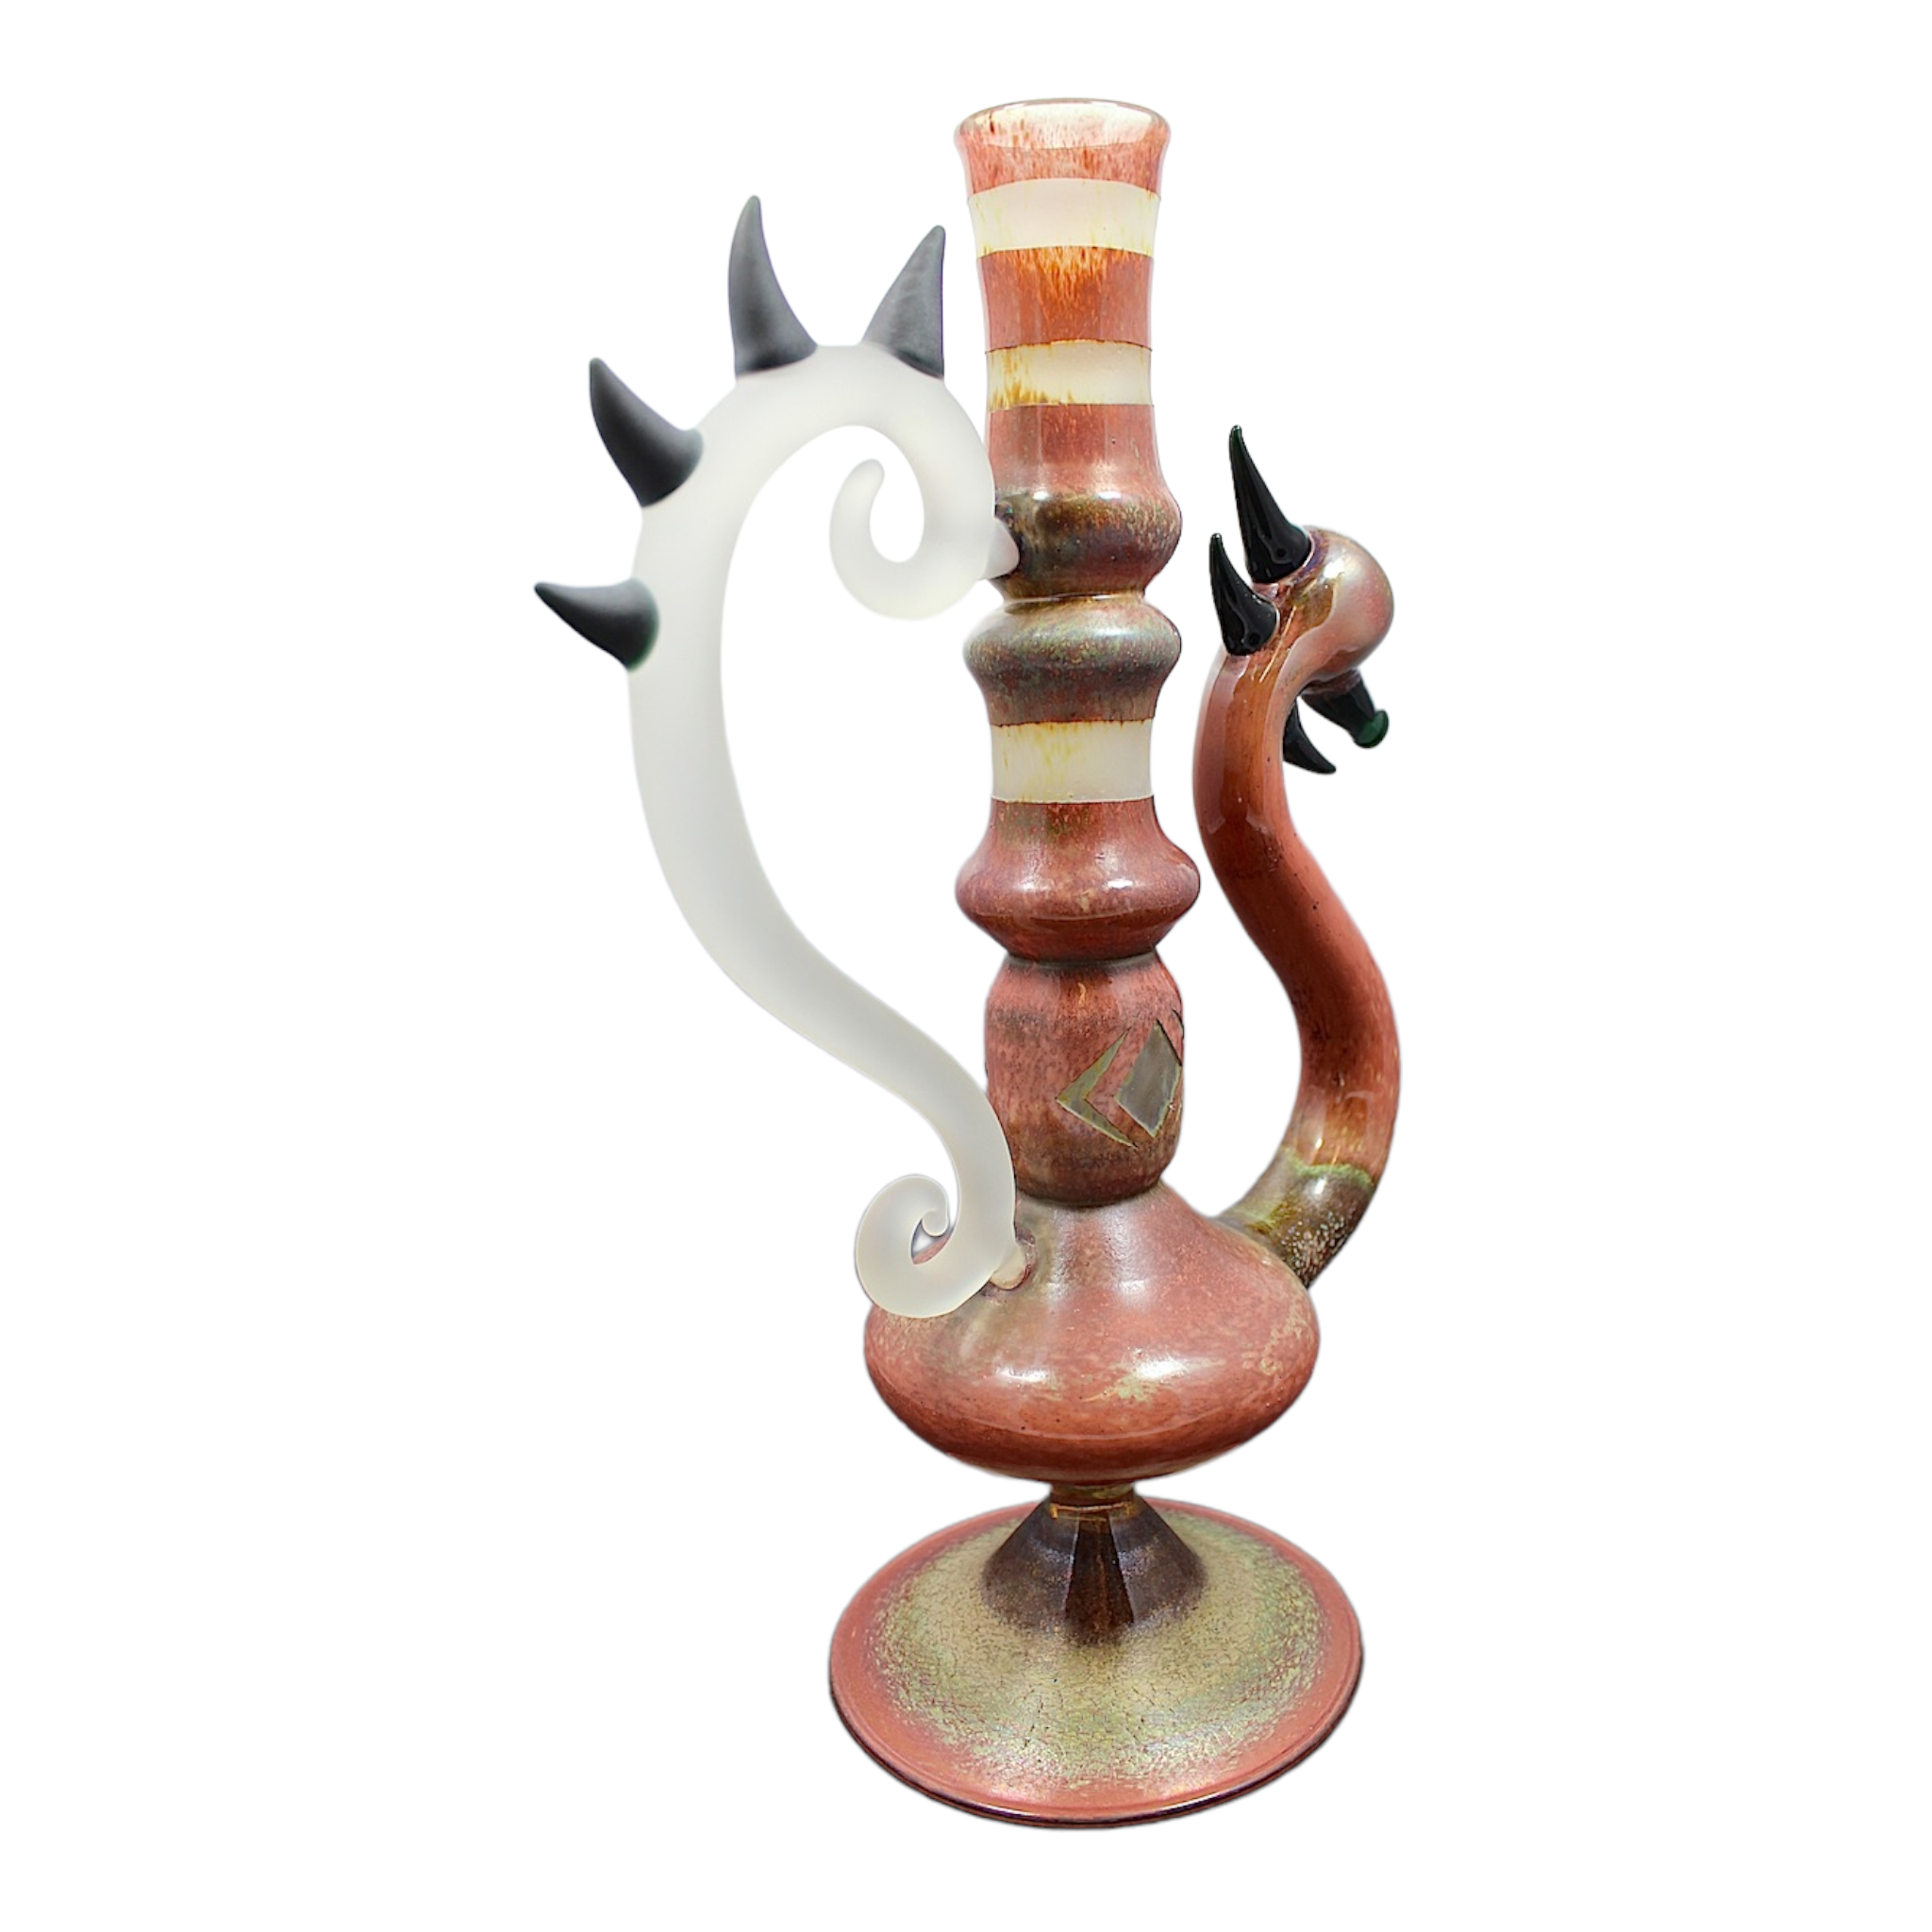 Darby Holm - 2007 Push Bubbler - Wine Decanter